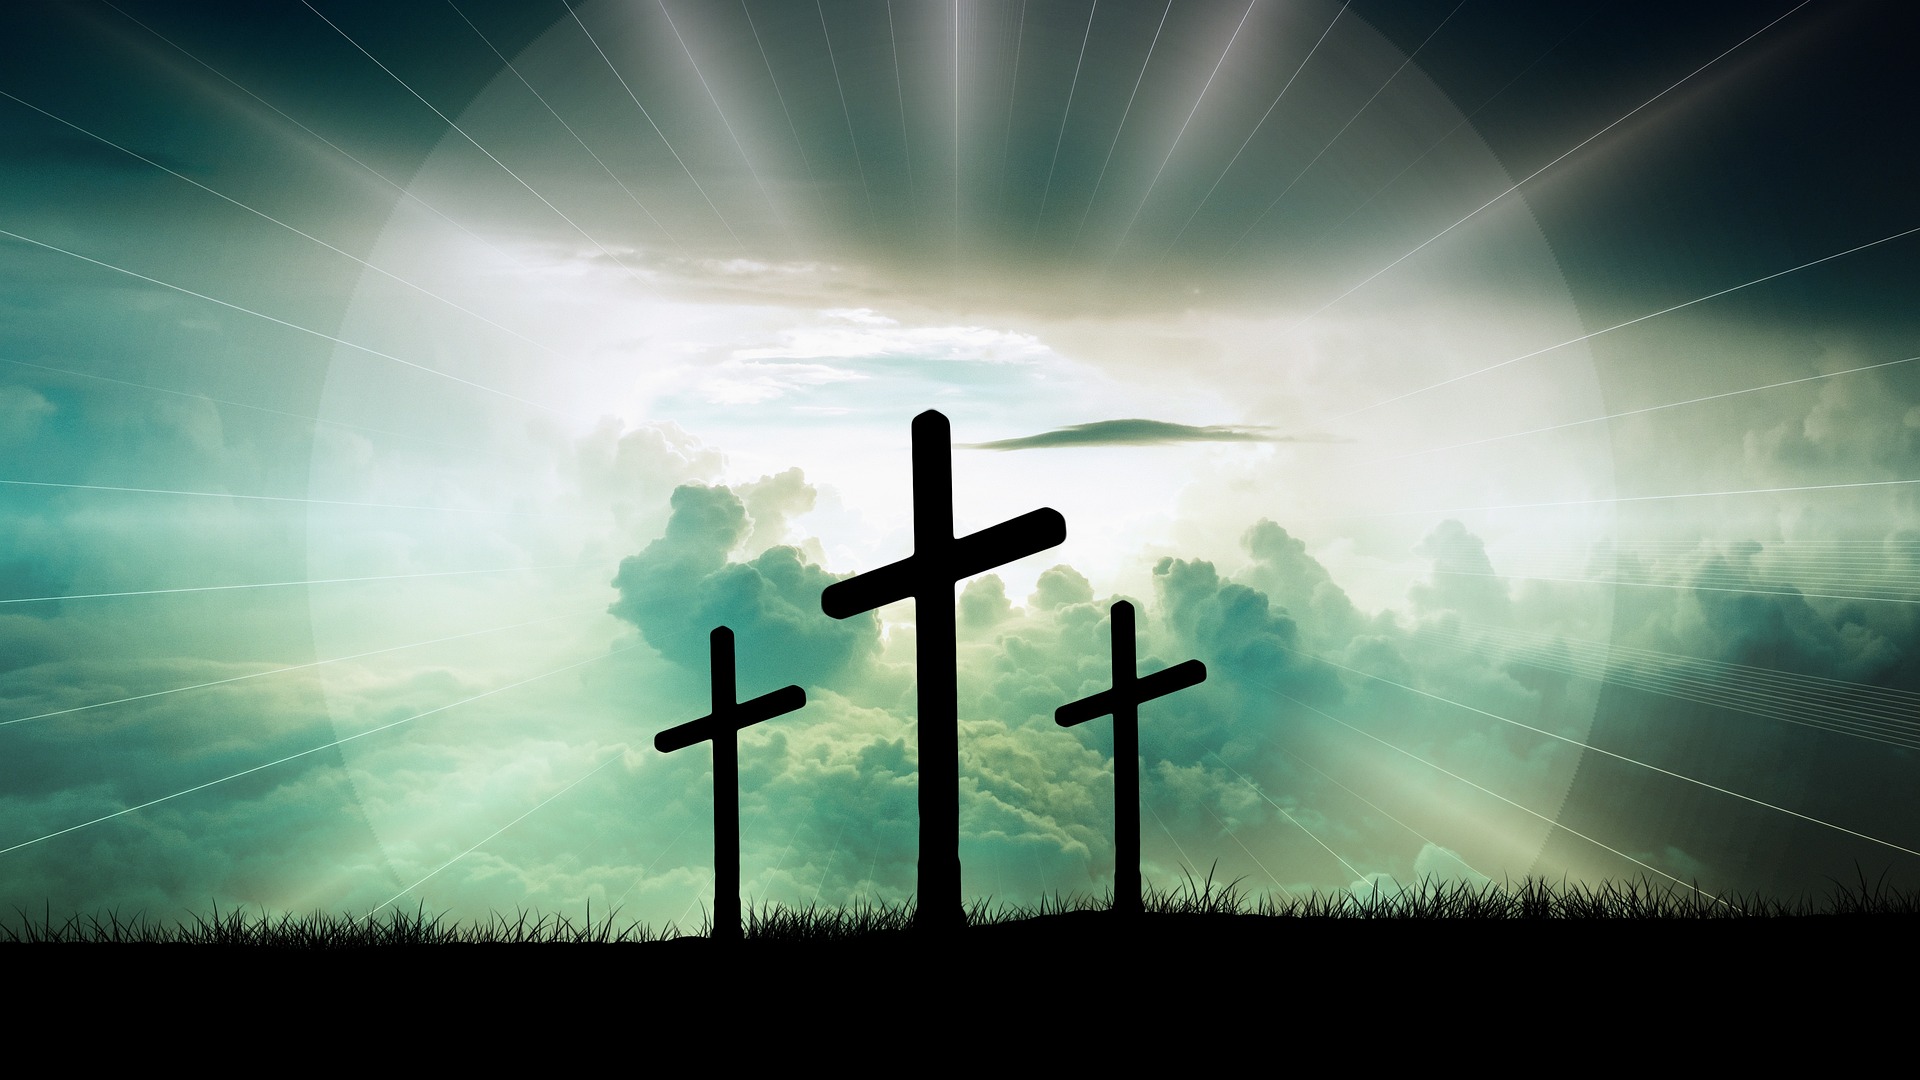 A picture of three crosses